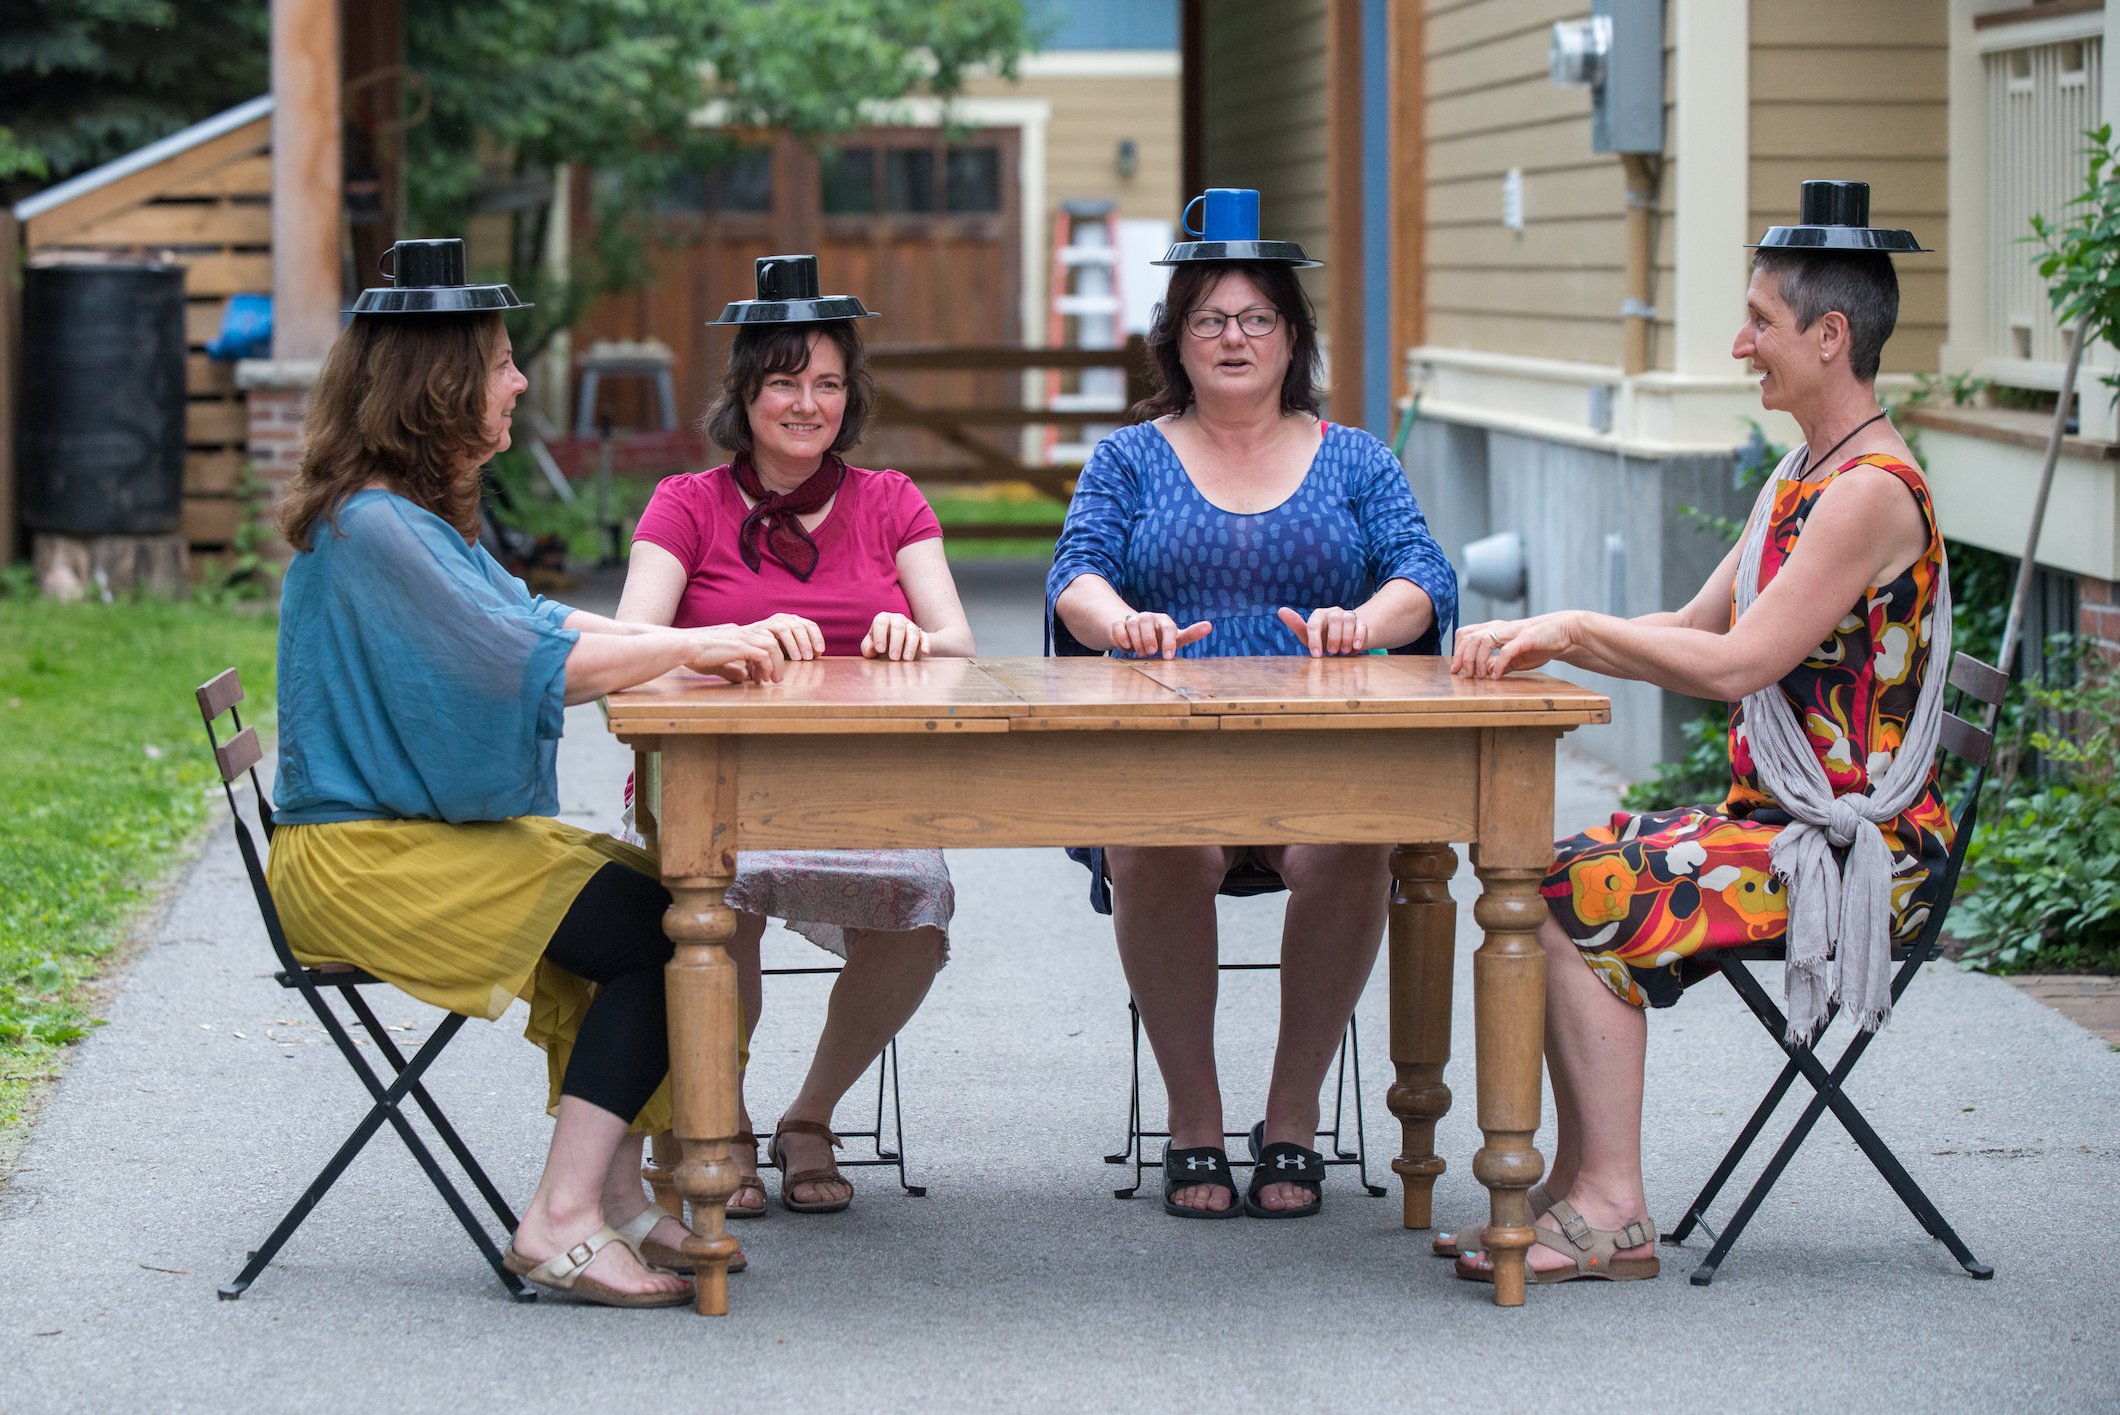 Four participants sit at a table with plates and mugs balanced on their heads.